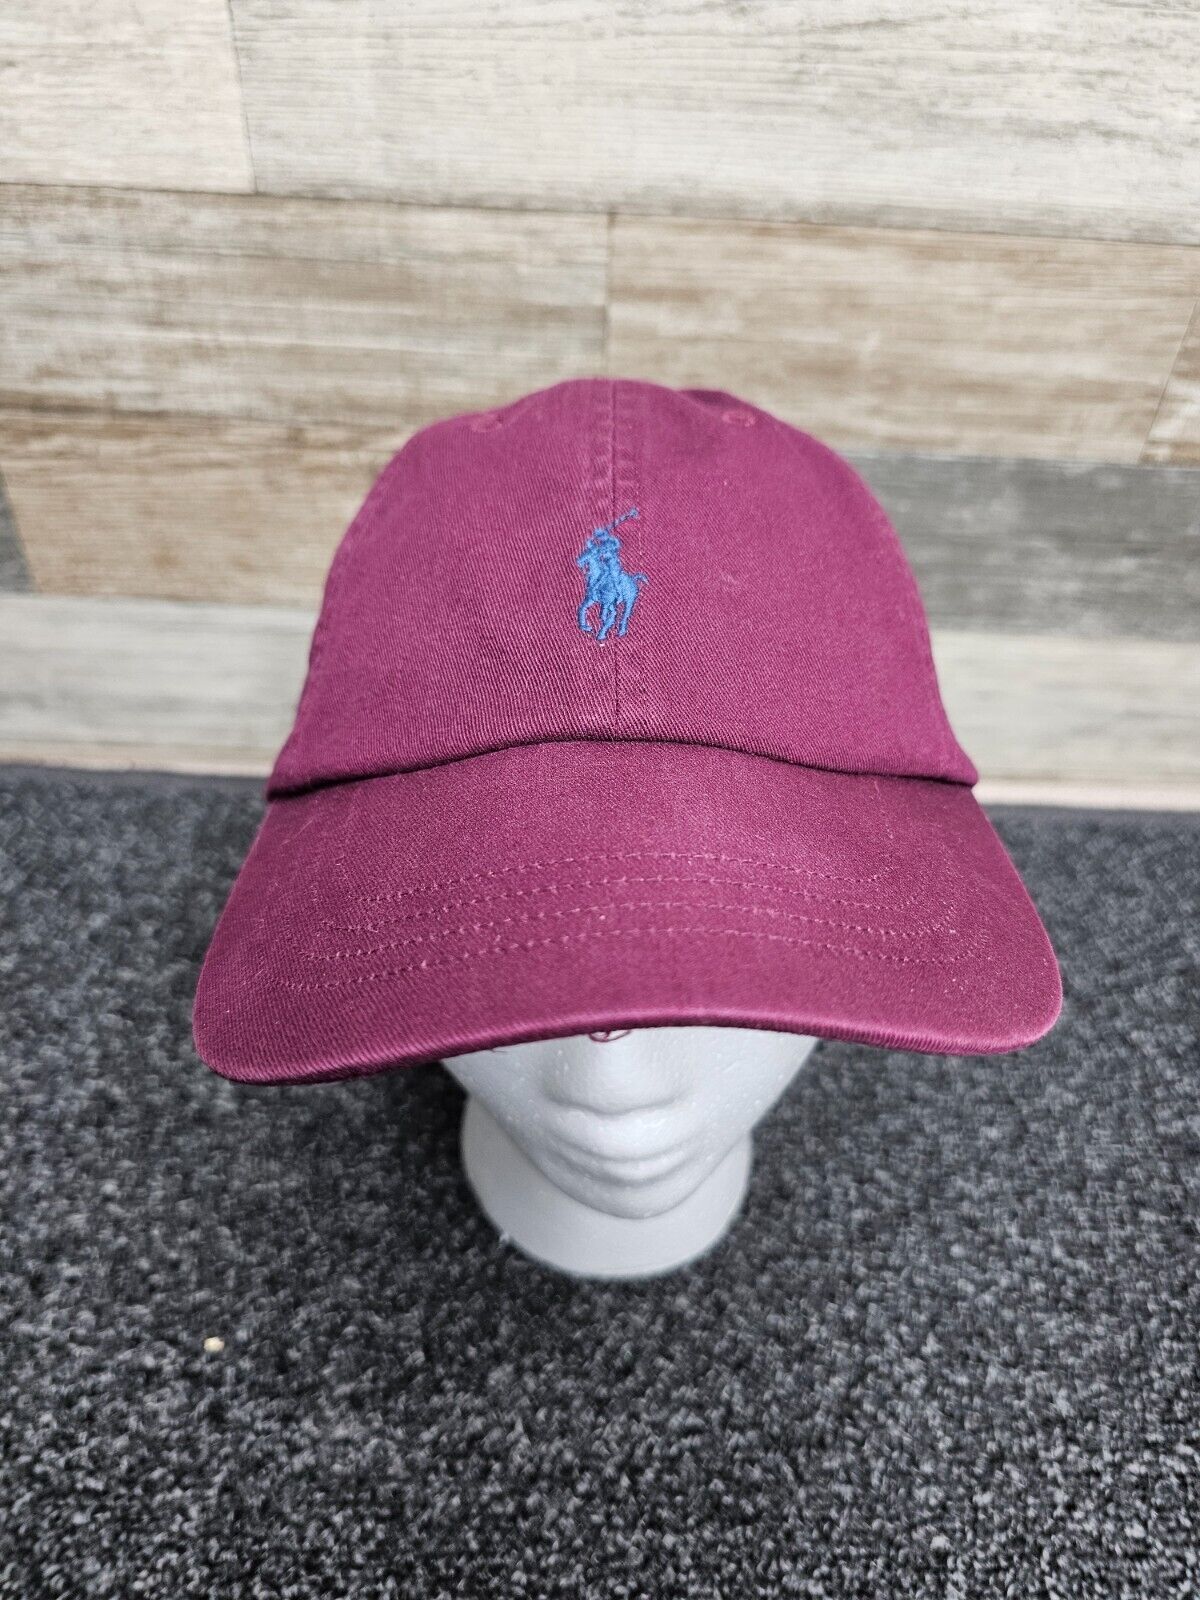 Primary image for Polo Ralph Lauren Men’s Embroidered Chino Baseball Cap Maroon - One Size!